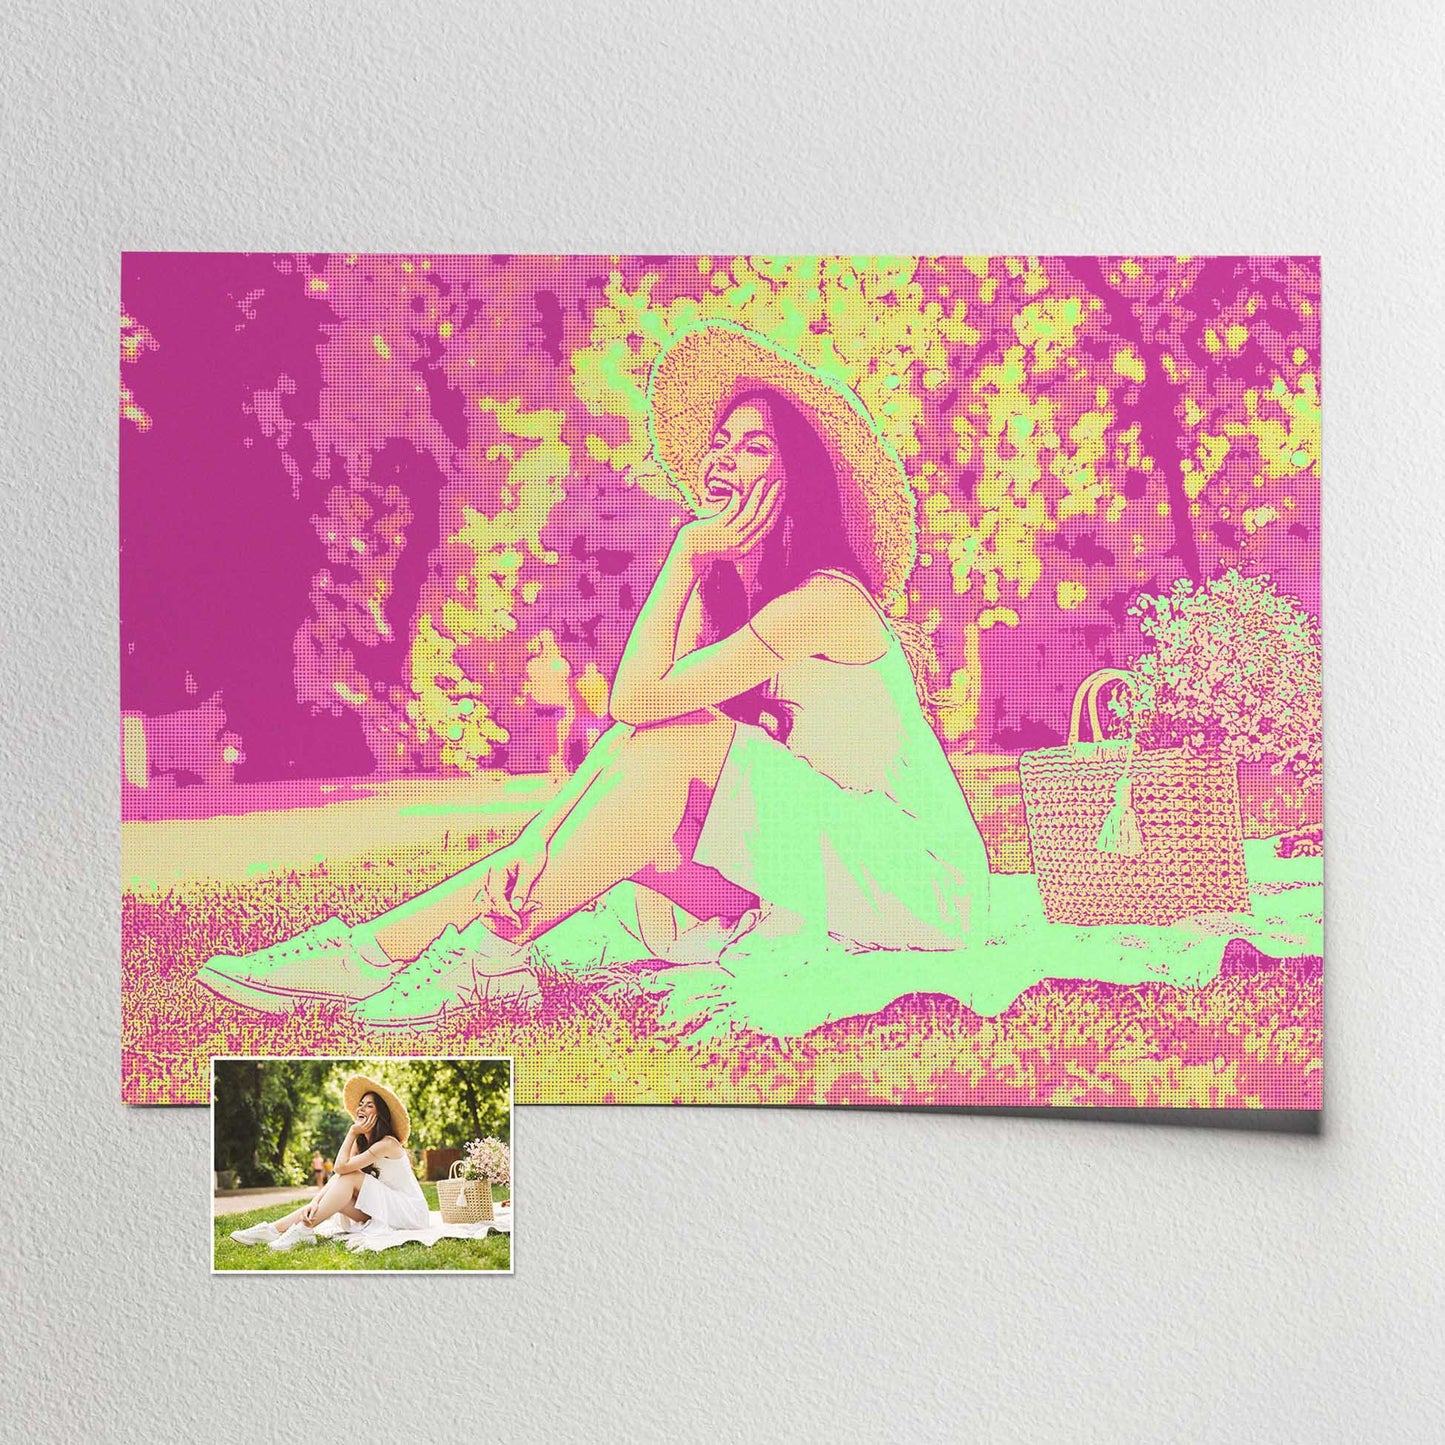 Funky and Artistic Pop Art Print: Transform your photo into a unique and eye-catching piece of wall art with this personalised green and pink pop art print. The halftone filter adds a cool and funky vibe